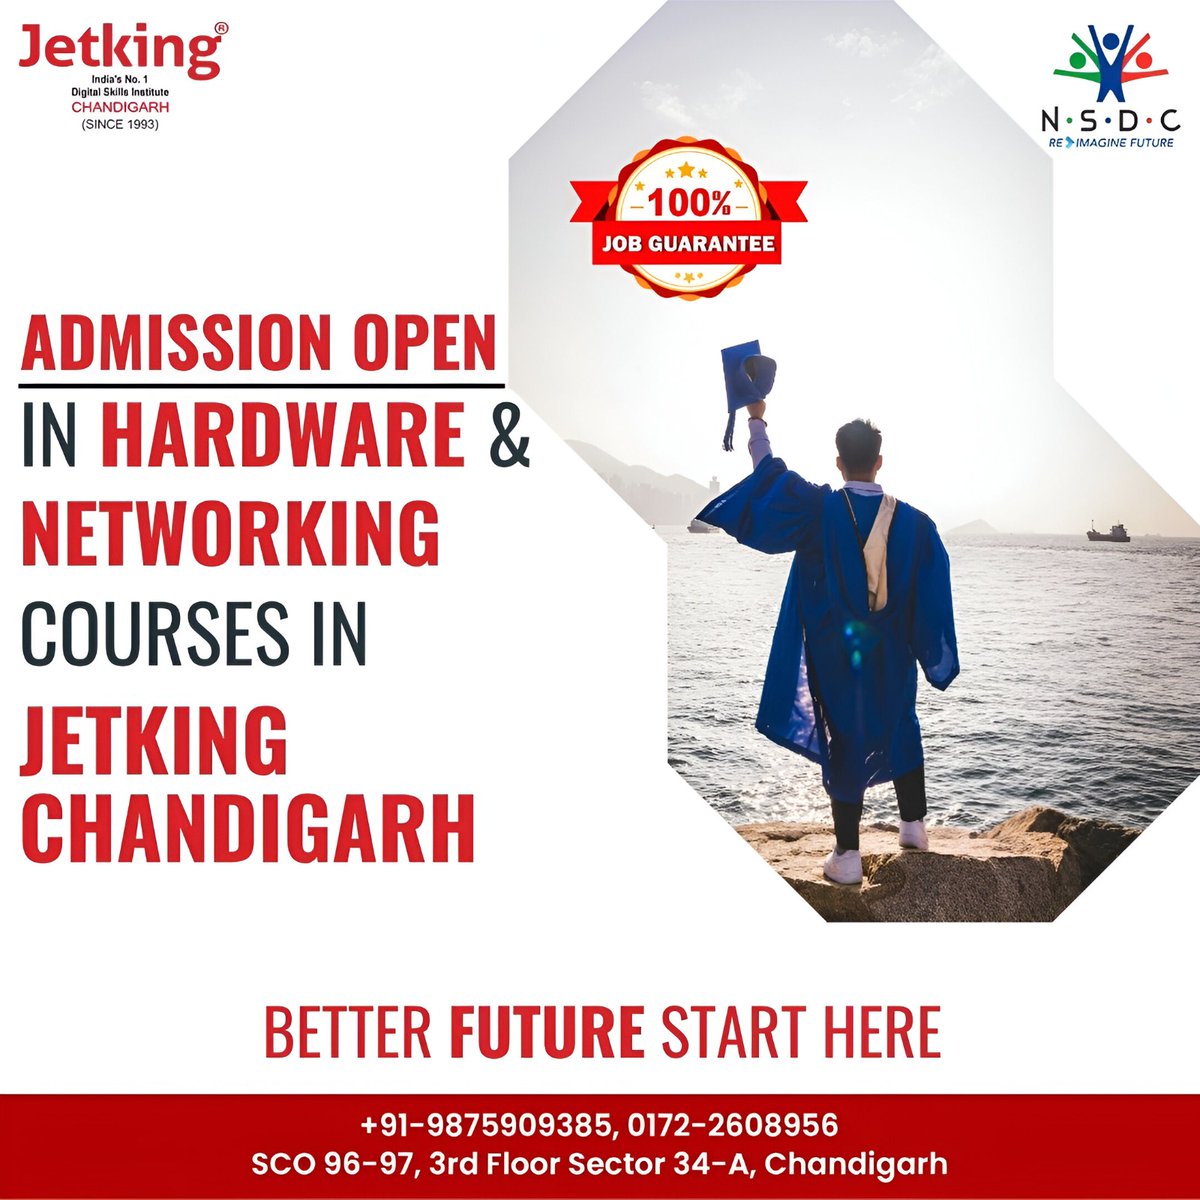 Unlock your potential in the world of technology! 📷 Admission now open for Hardware & Networking courses at Jetking Chandigarh. Don't miss your chance to soar in the digital age.
#JetkingChandigarh #Hardware #Networking #TechEducation #Admissionnow #technology #Chandigarh